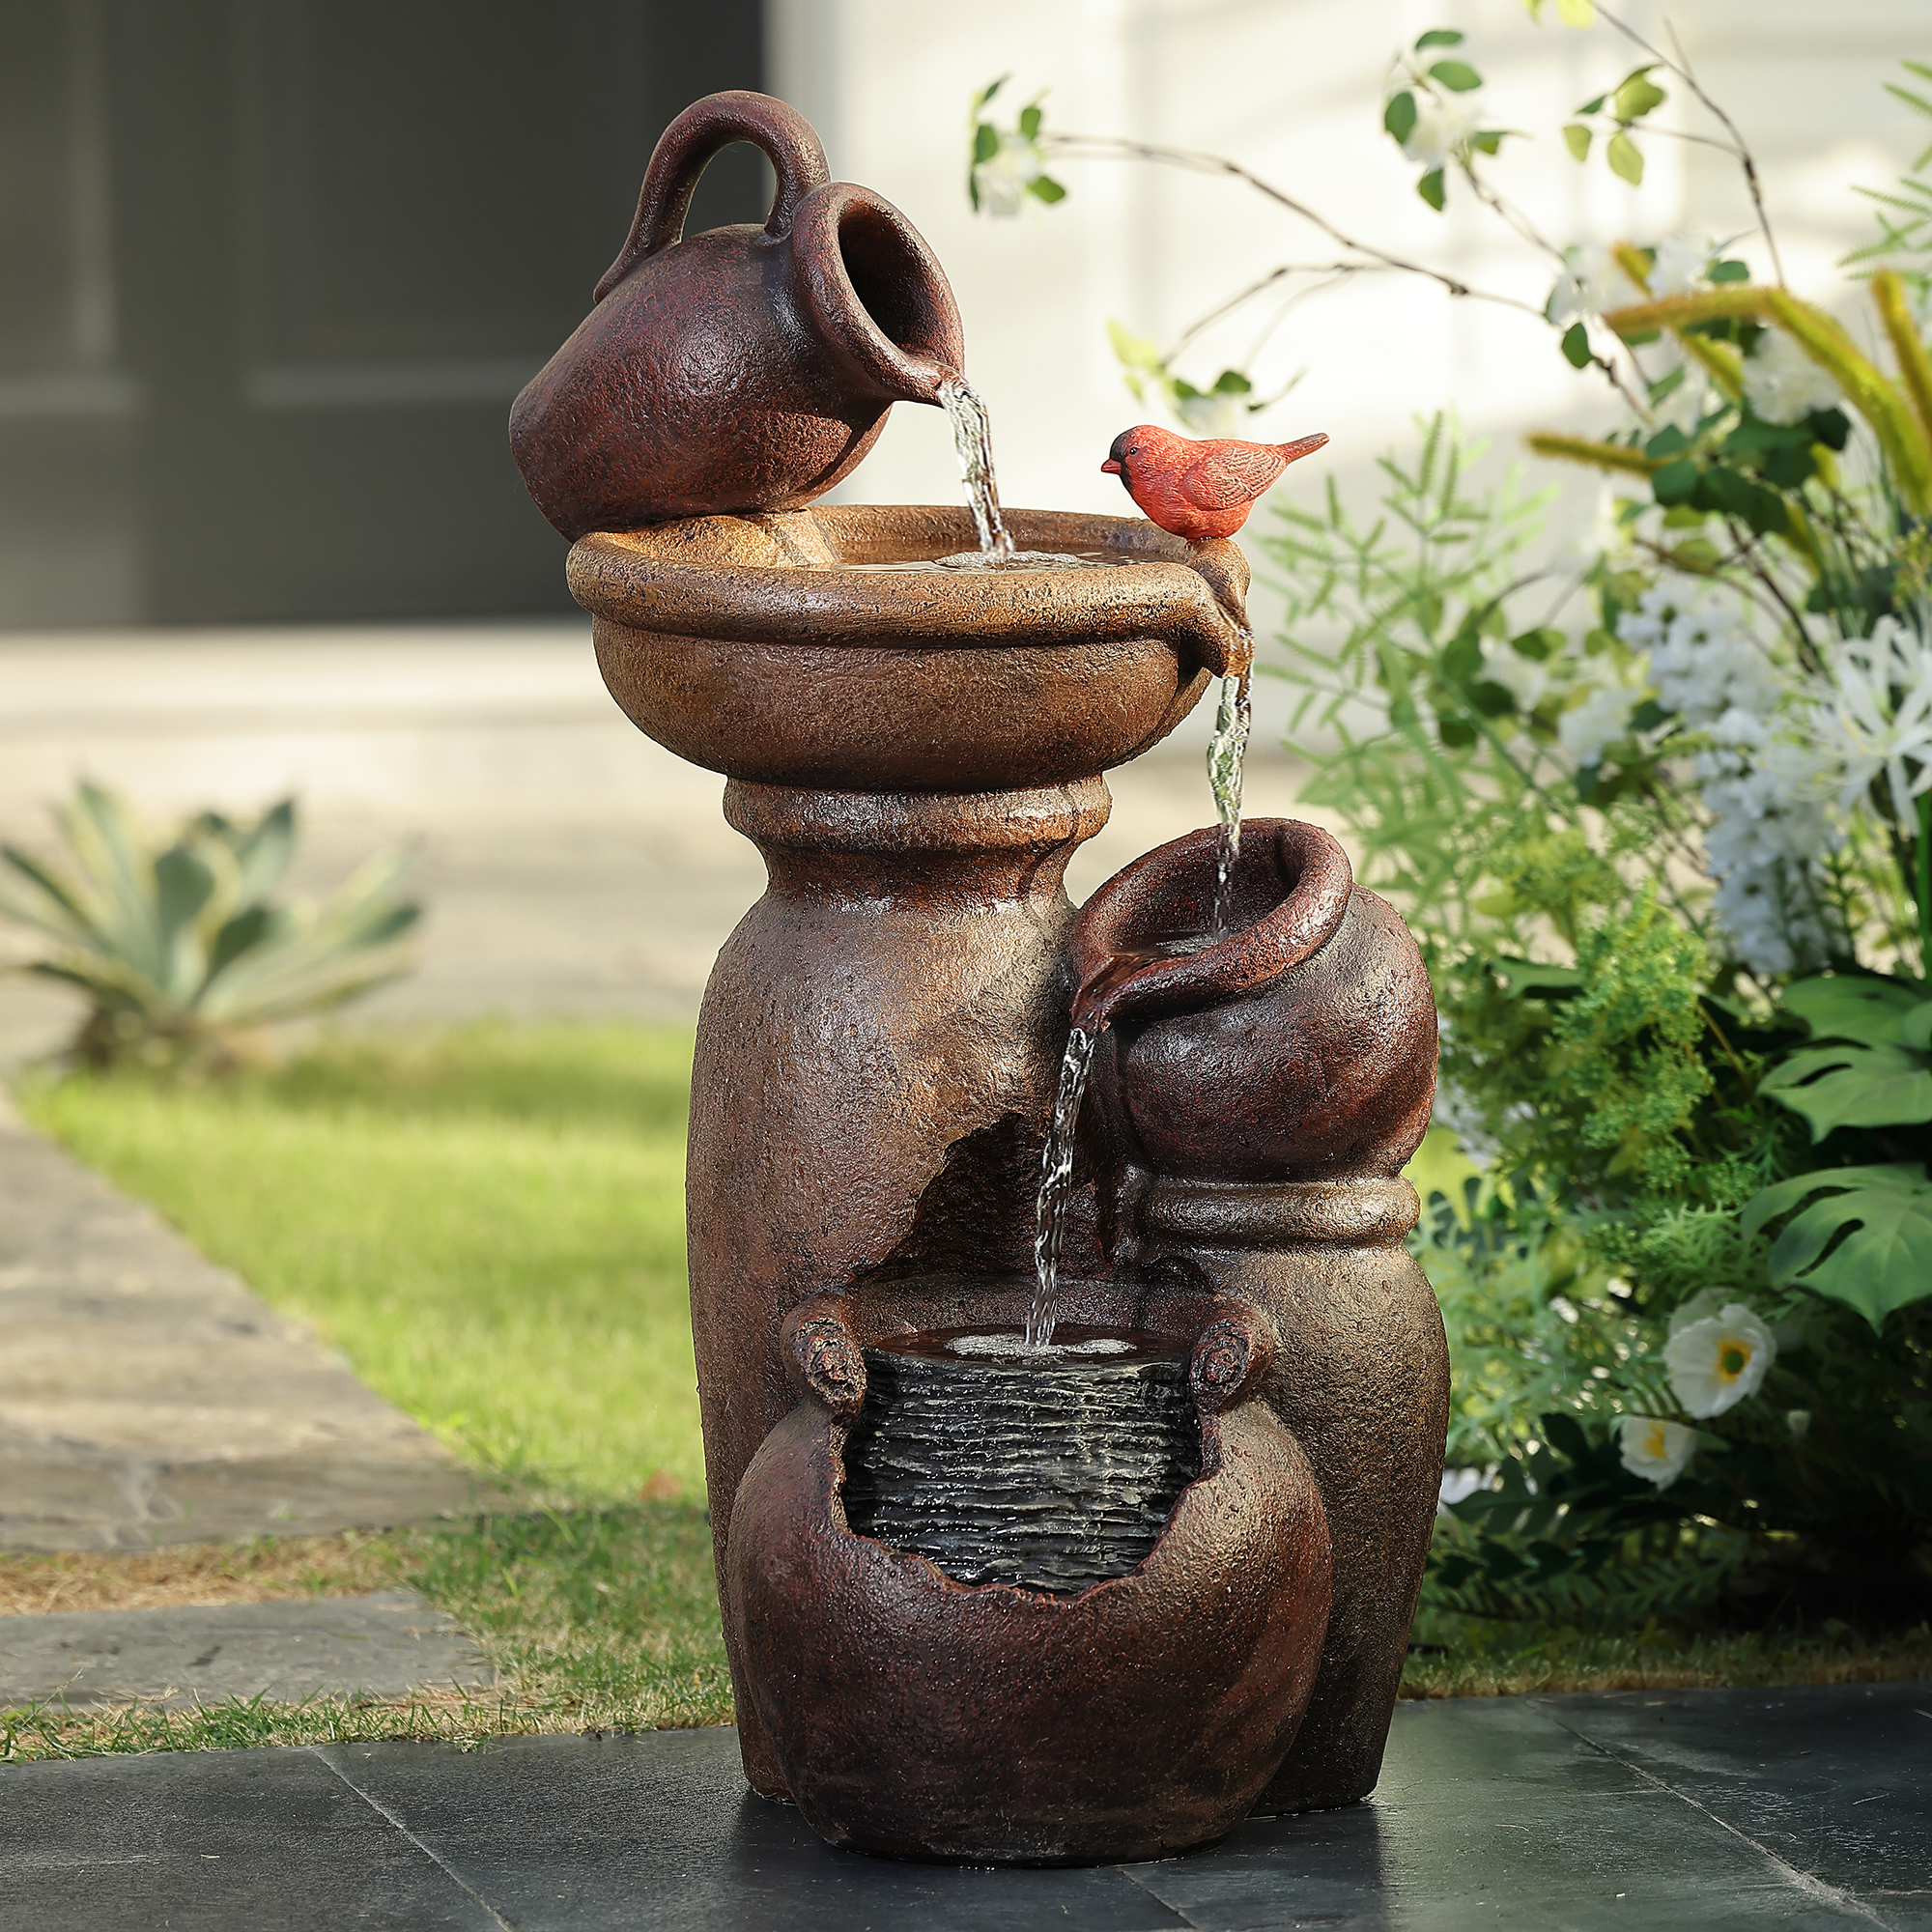 Whf727 Cement & Resin Roma Pitcher & Pot Tiered Outdoor Patio Fountain